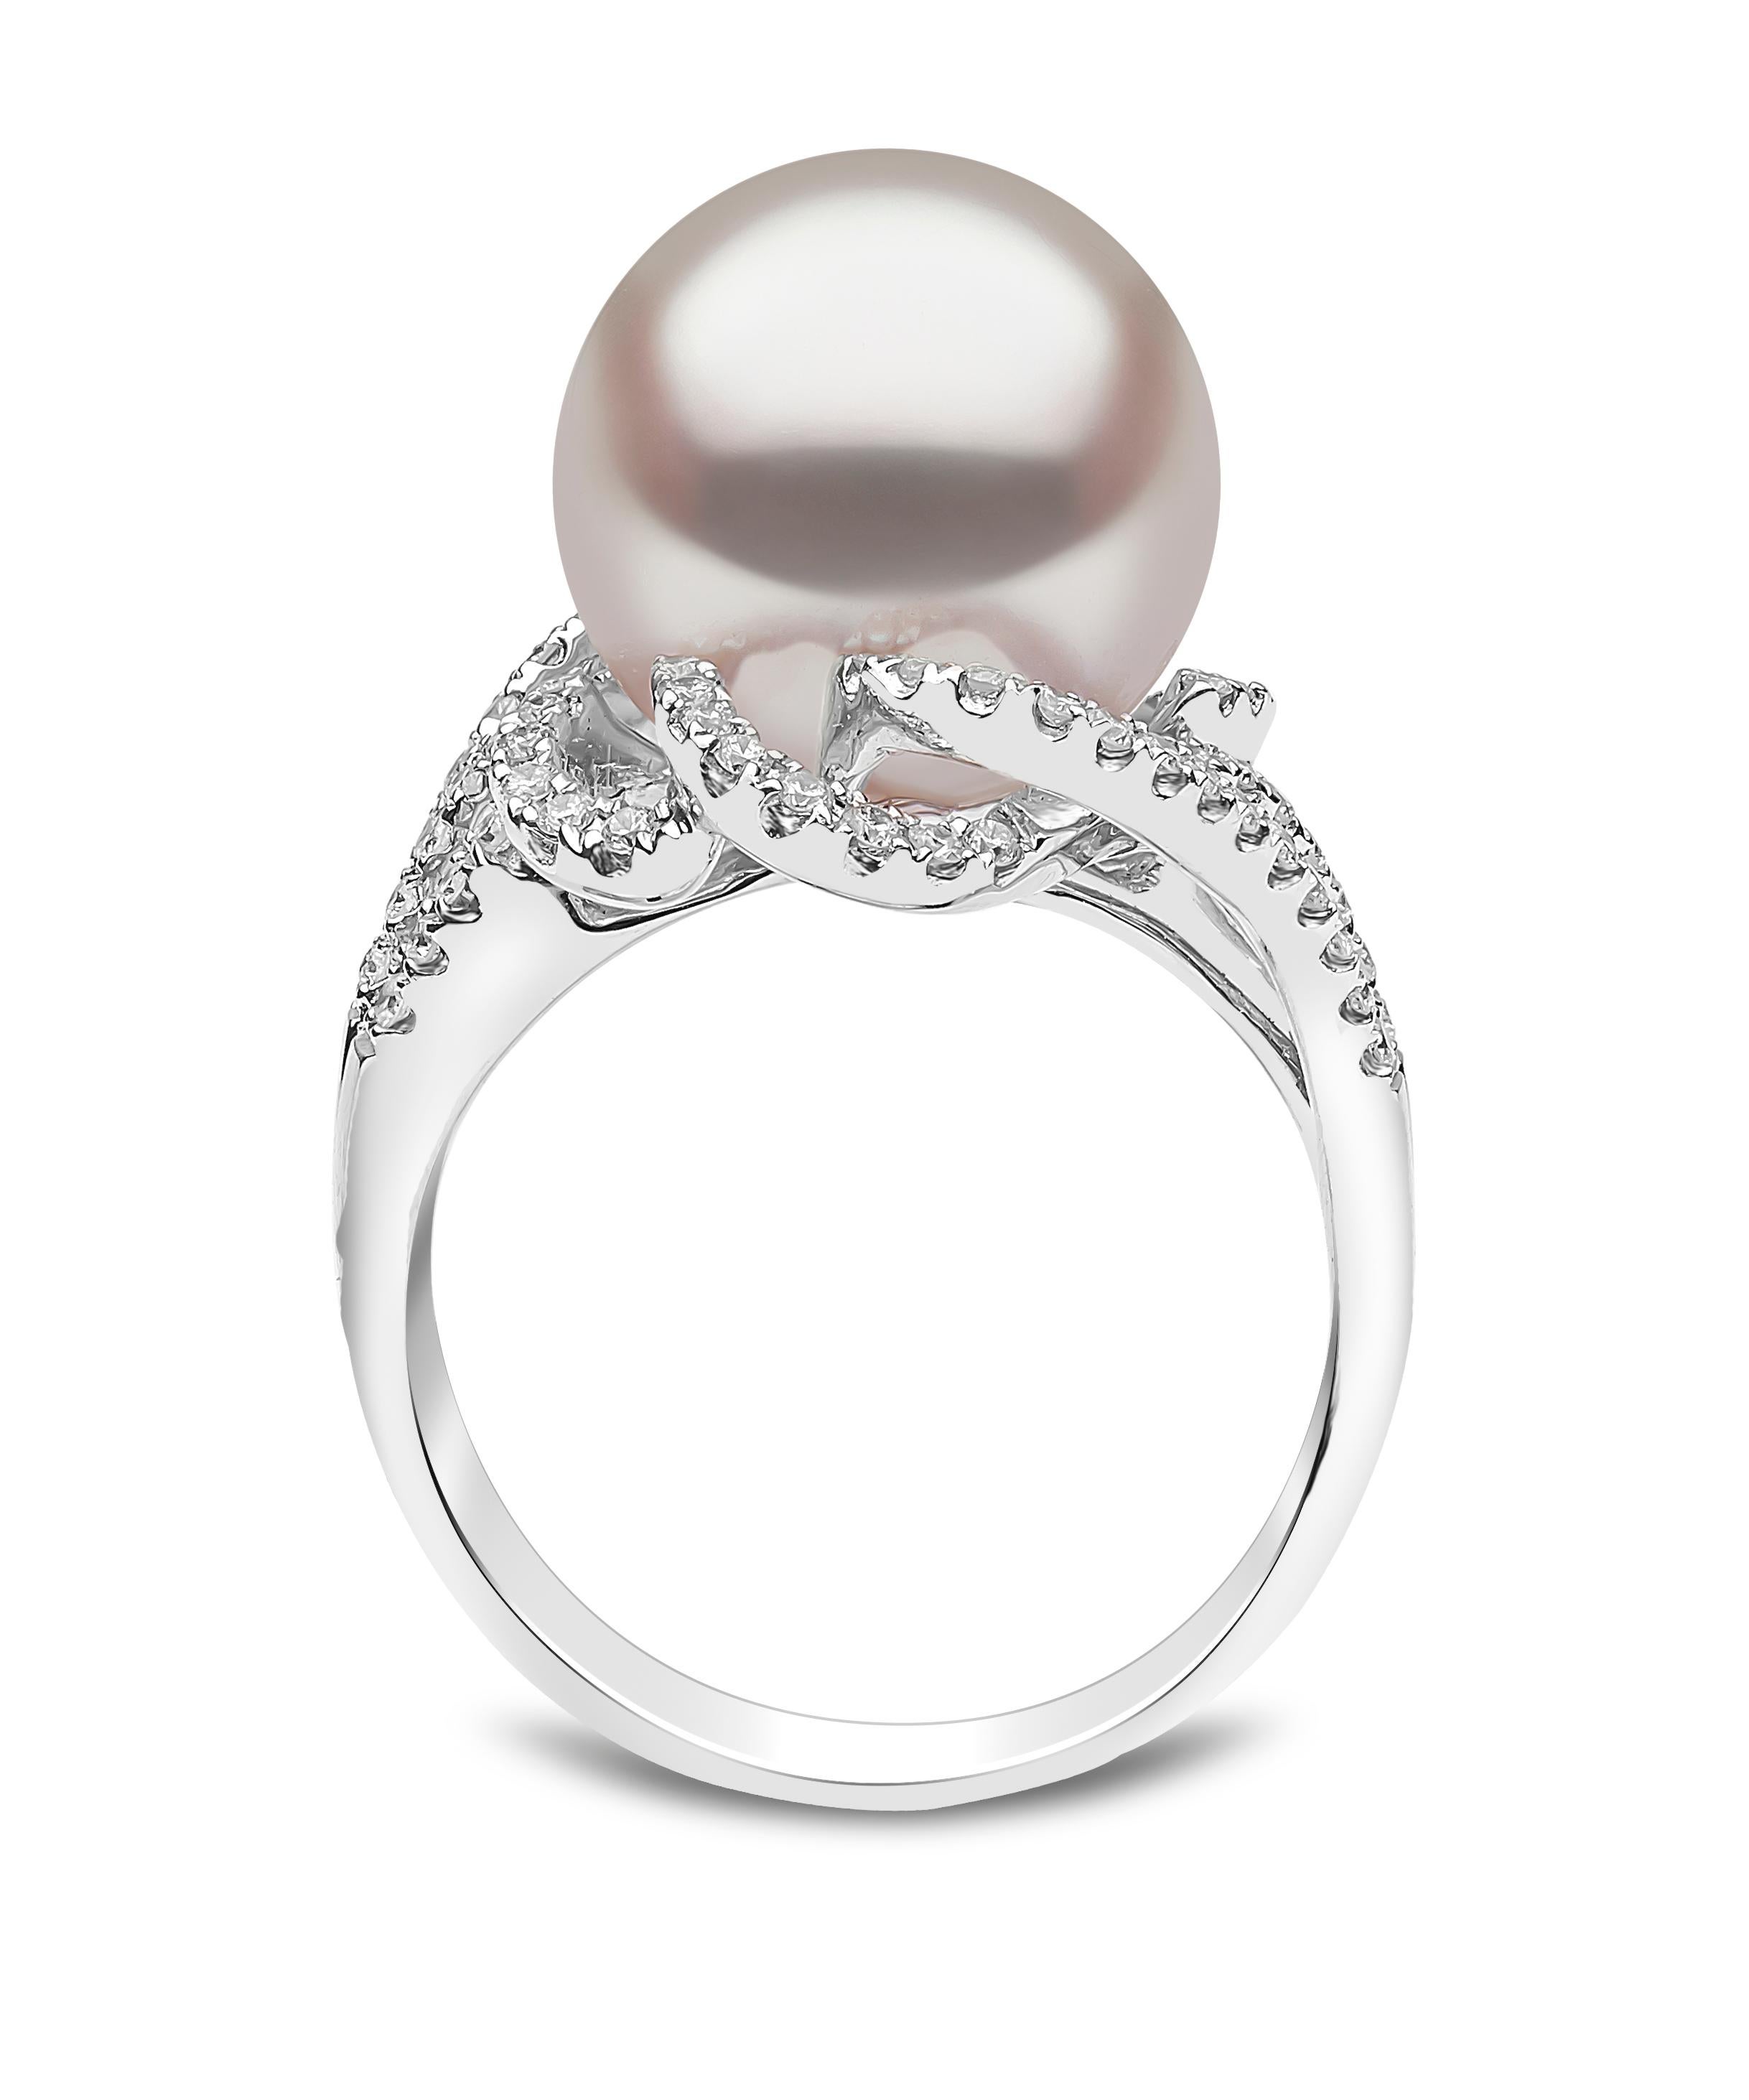 The superior lustre of the Australian South Sea pearl is perfectly enriched by the contemporary diamond surround in this Yoko London ring. This winning combination is further enhanced by the 18 Karat white gold setting which allows the pearl and